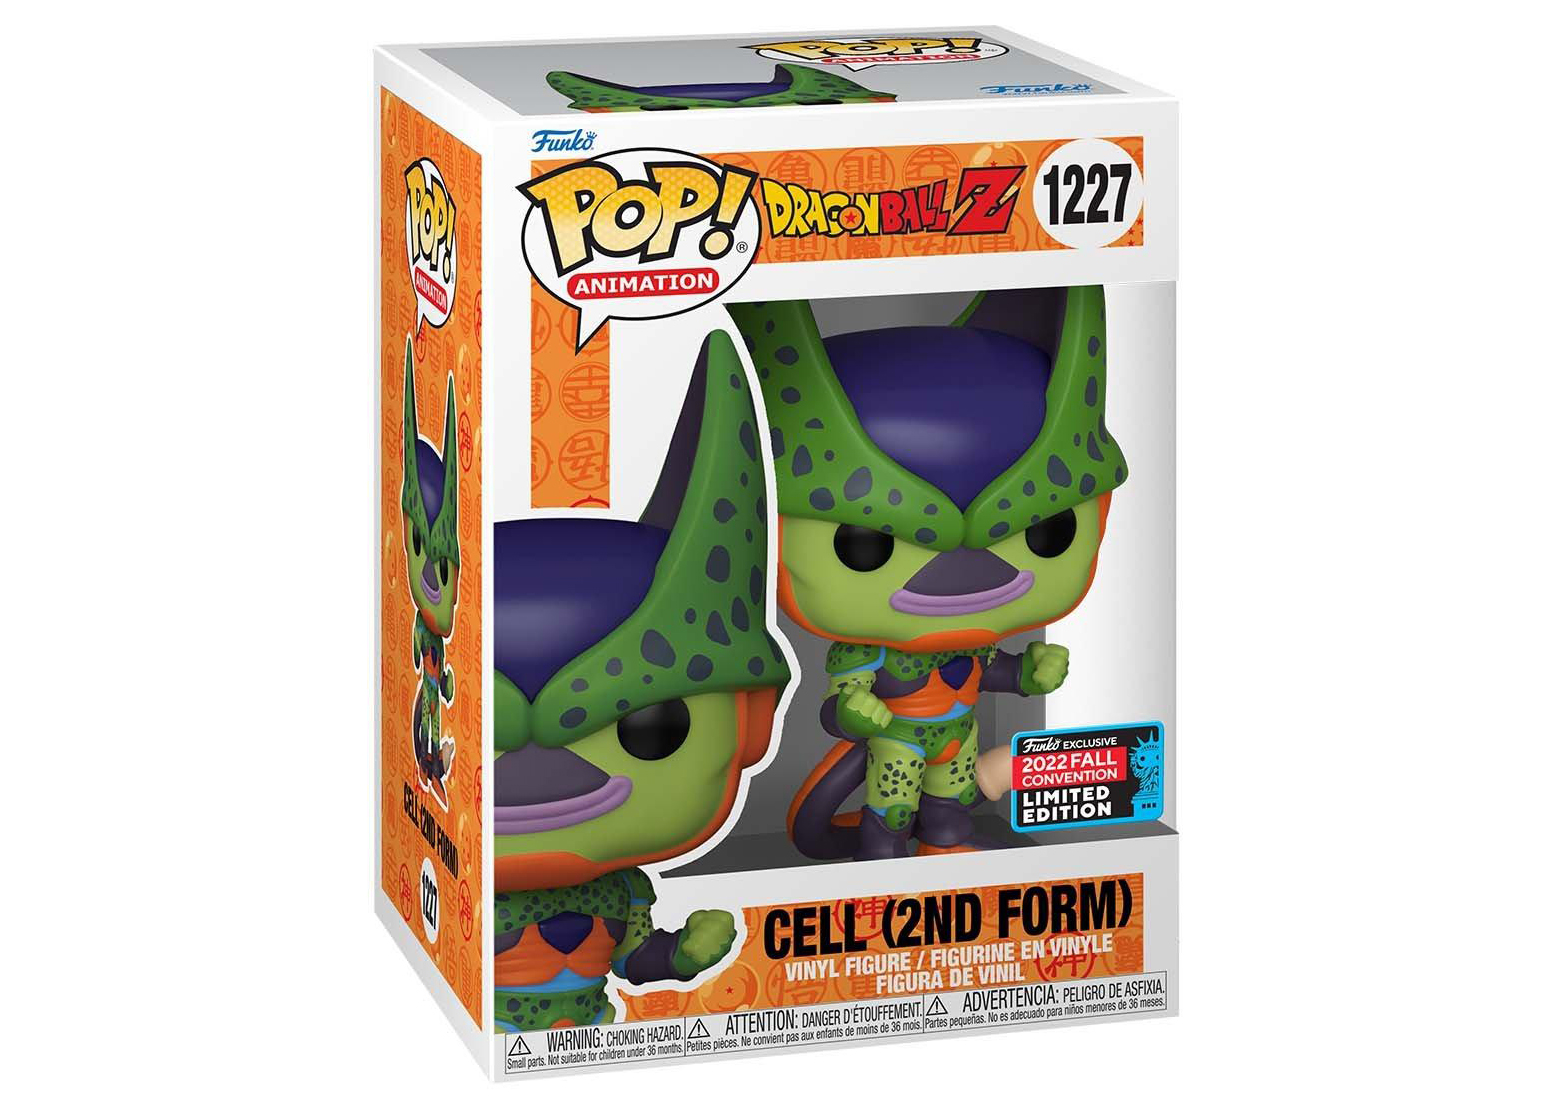 Funko Pop! Animation Dragon Ball Z Cell (2nd Form) 2022 Fall